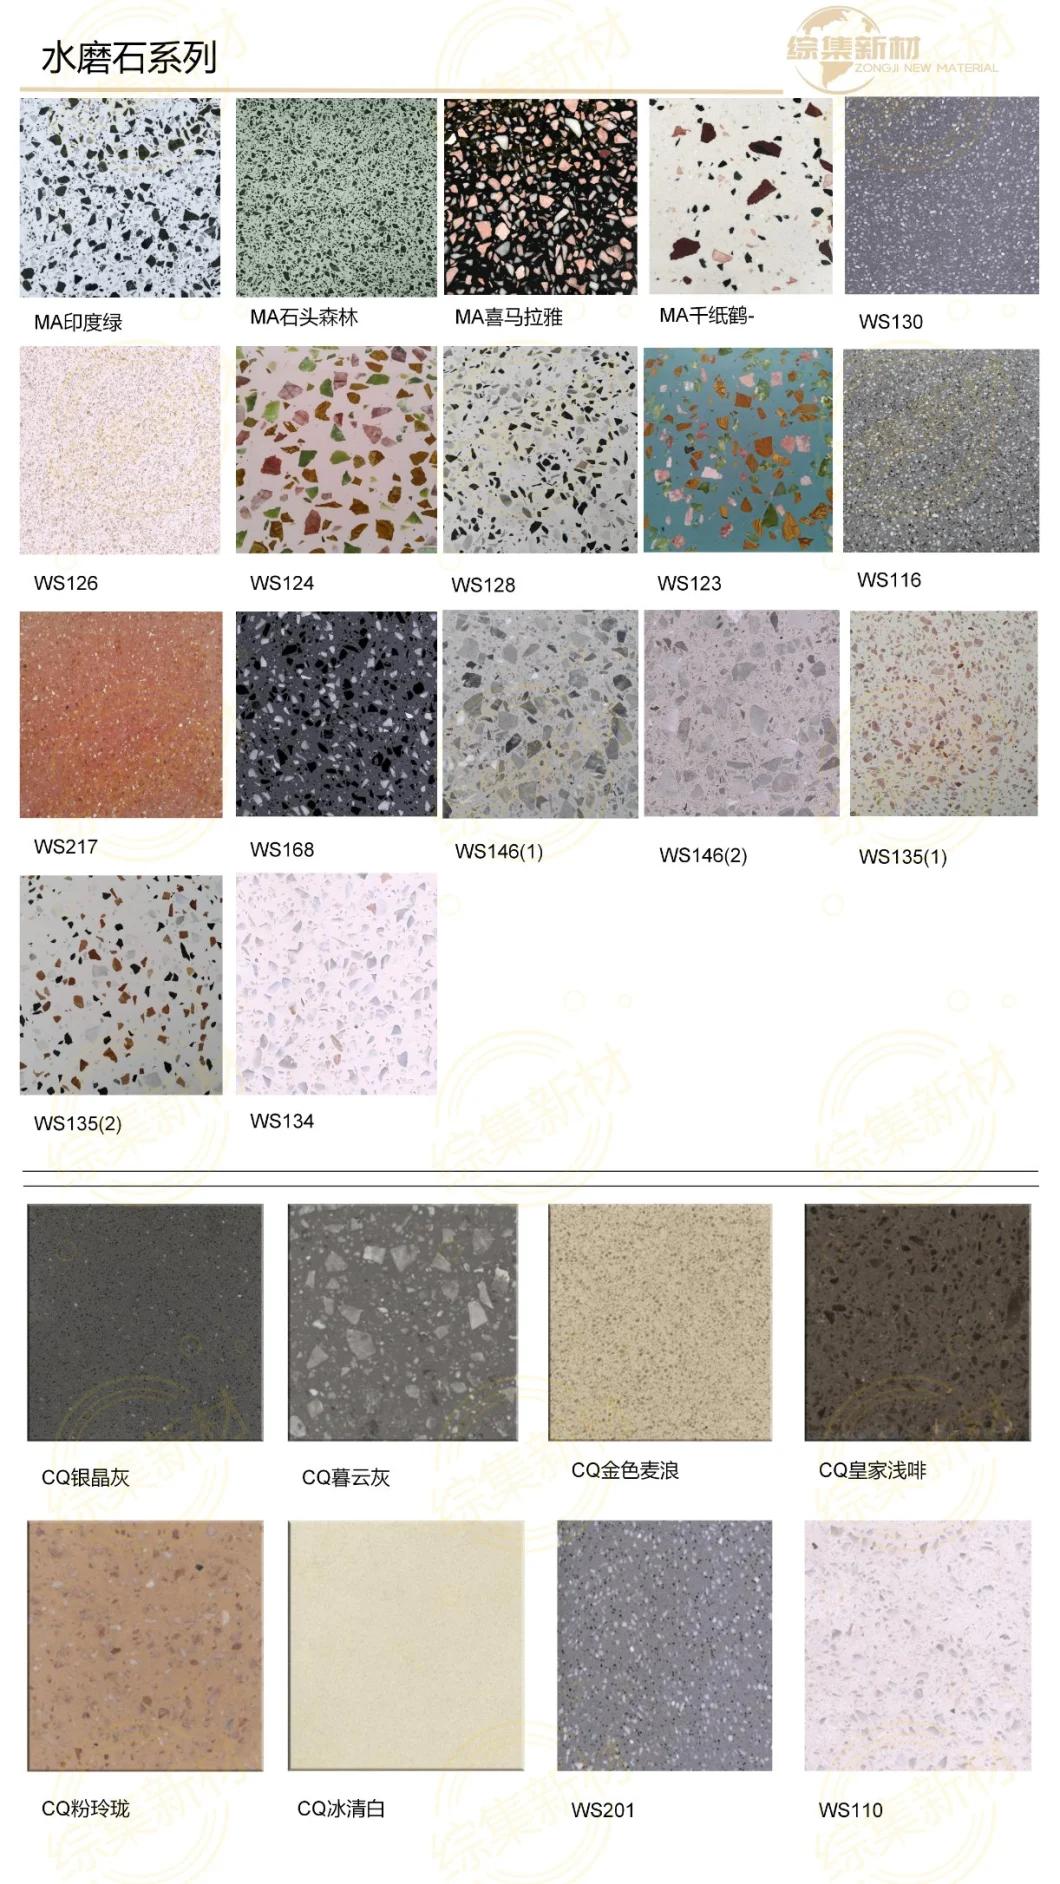 Artificial Stone Inorganic Colorful Terrazzo for Floor Wall Ceiling Decoration & Interior Furniture